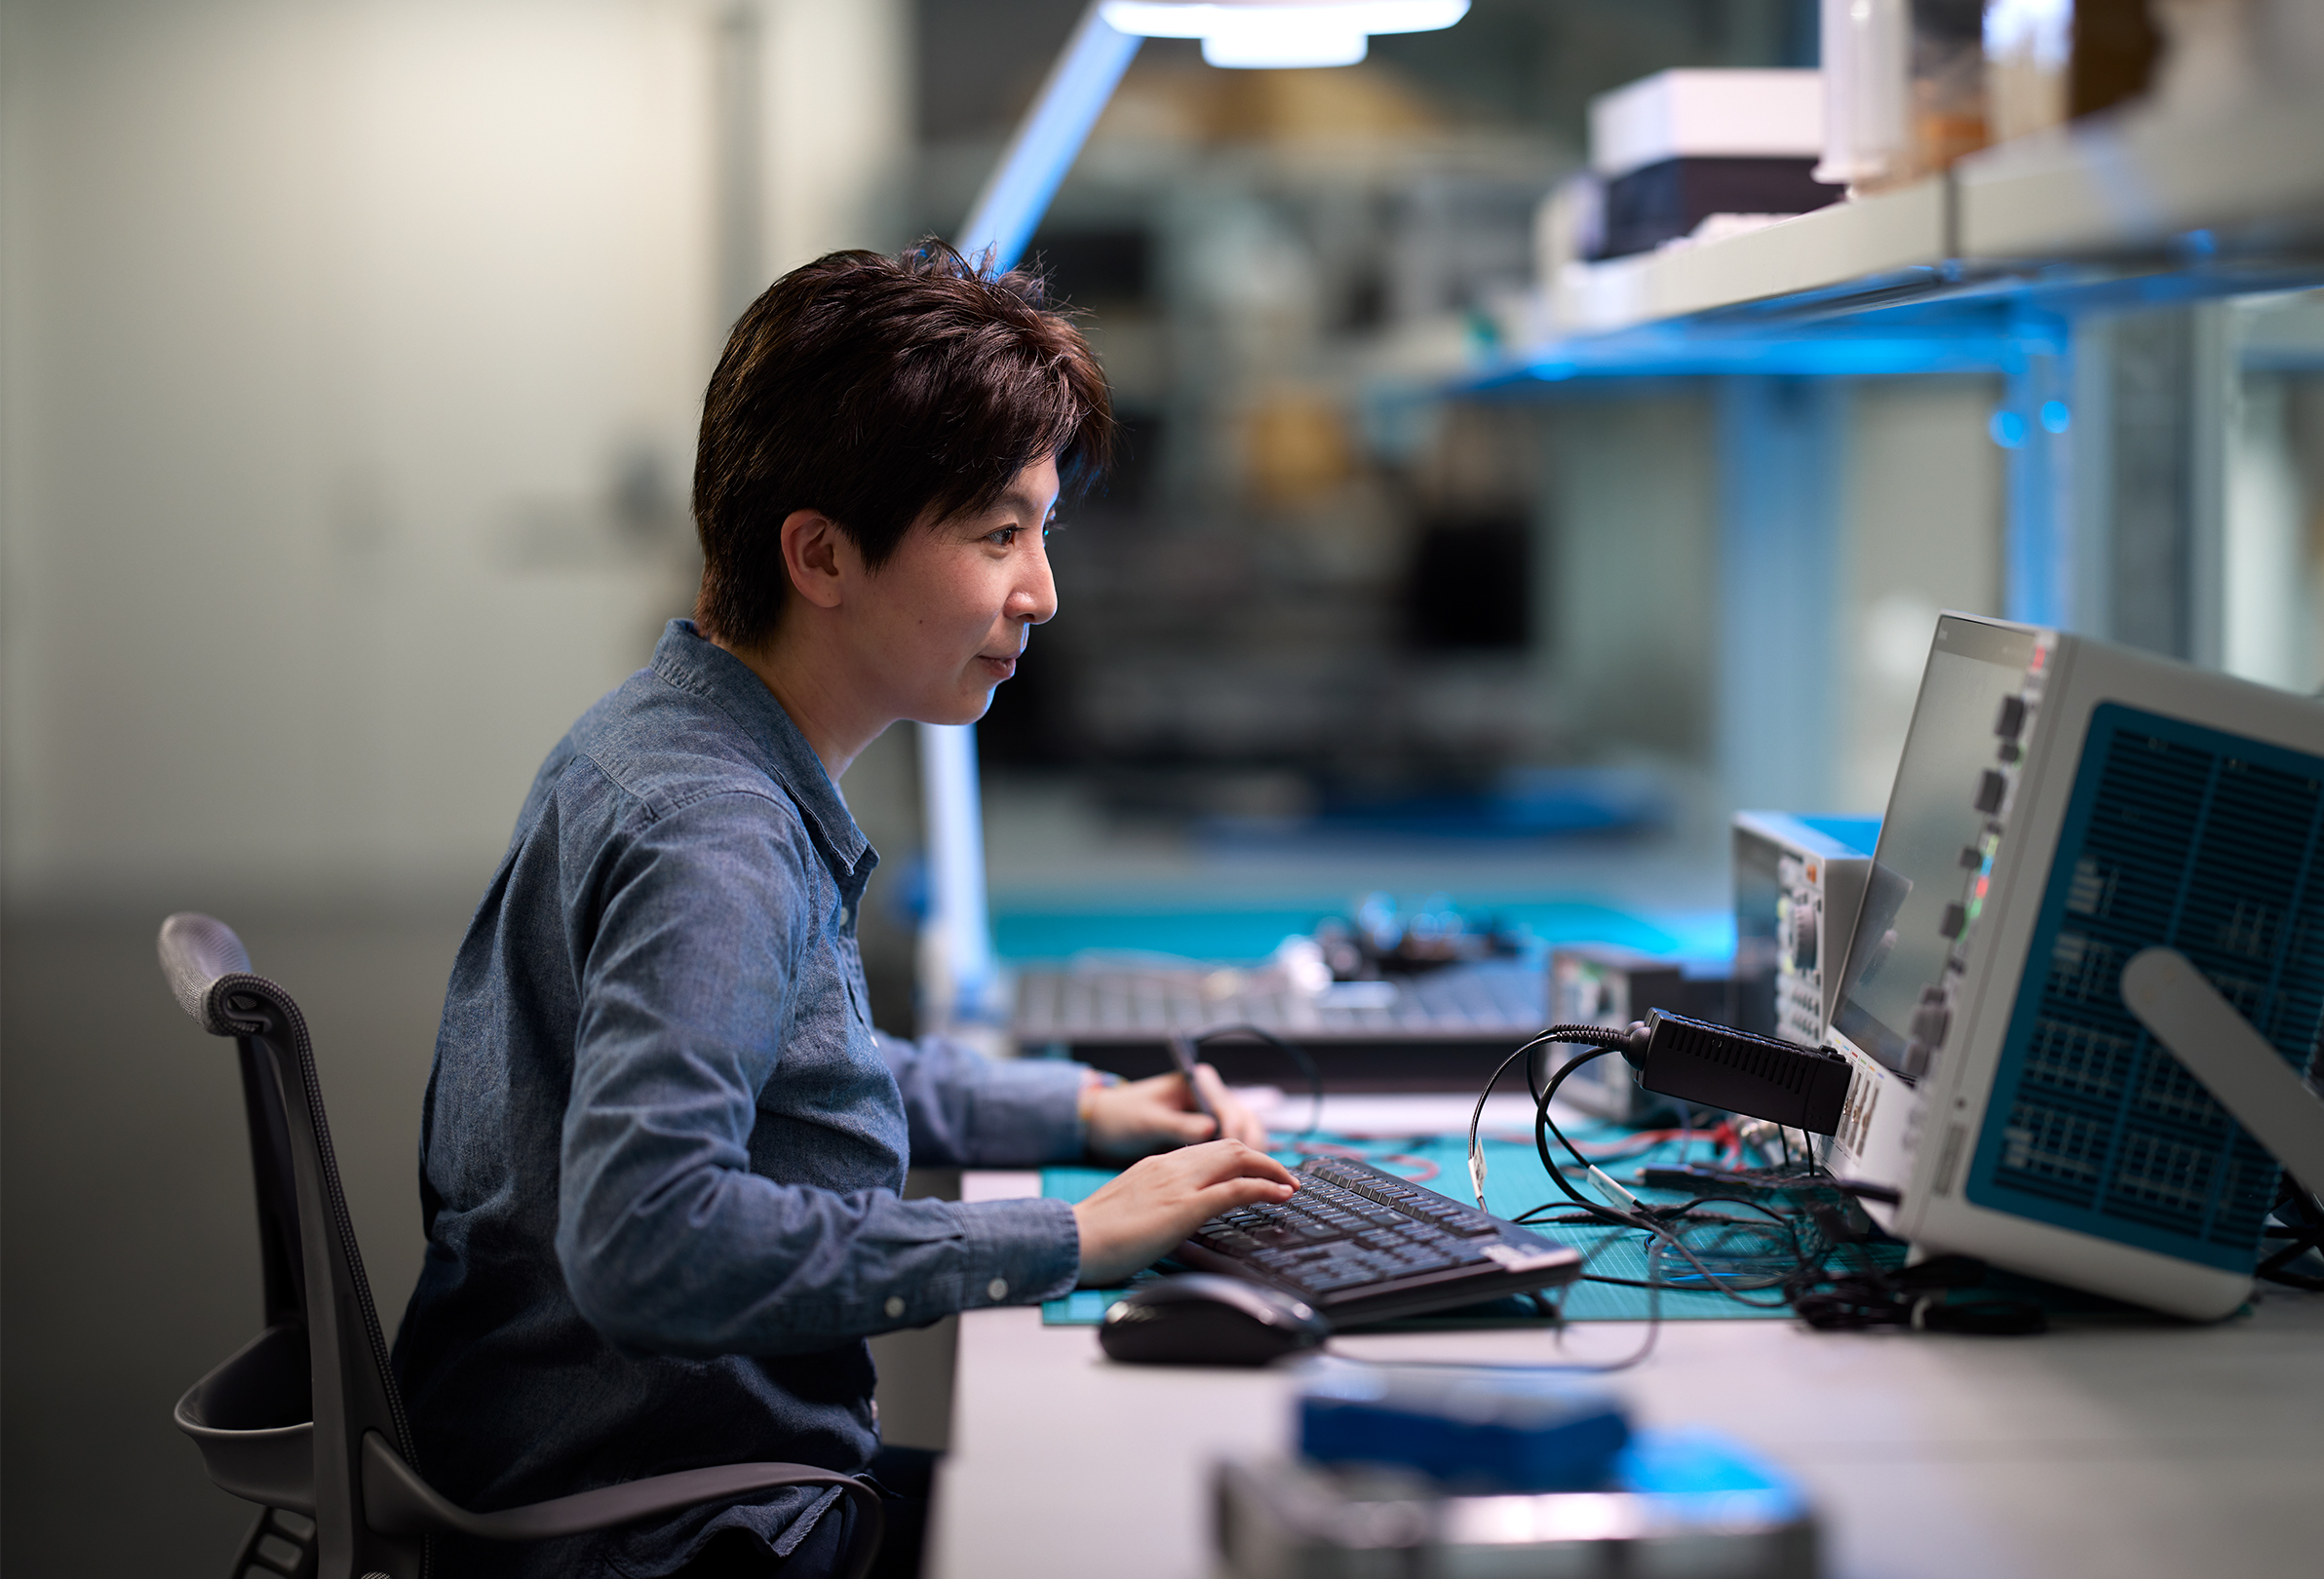 An Apple employee working in a hardware lab.